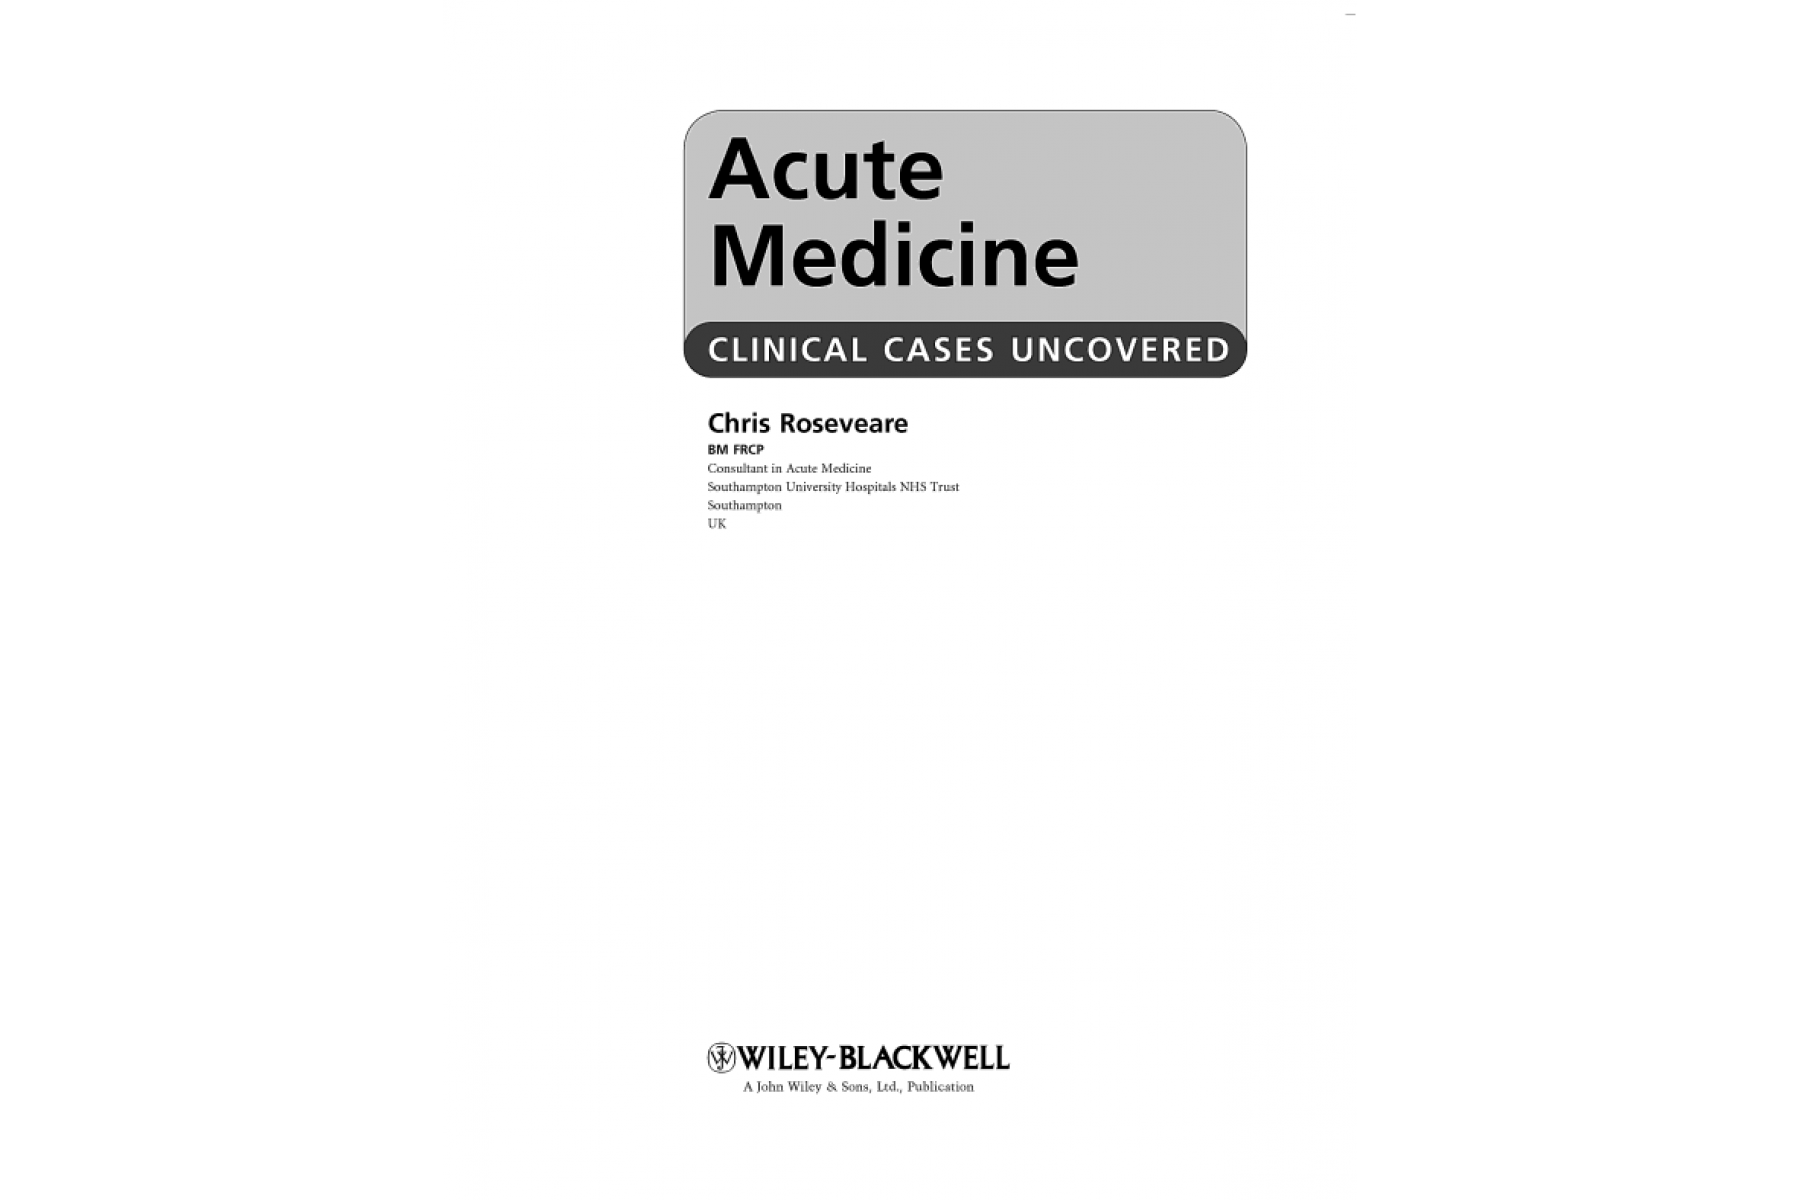 Acute Medicine - Clinical Cases Uncovered